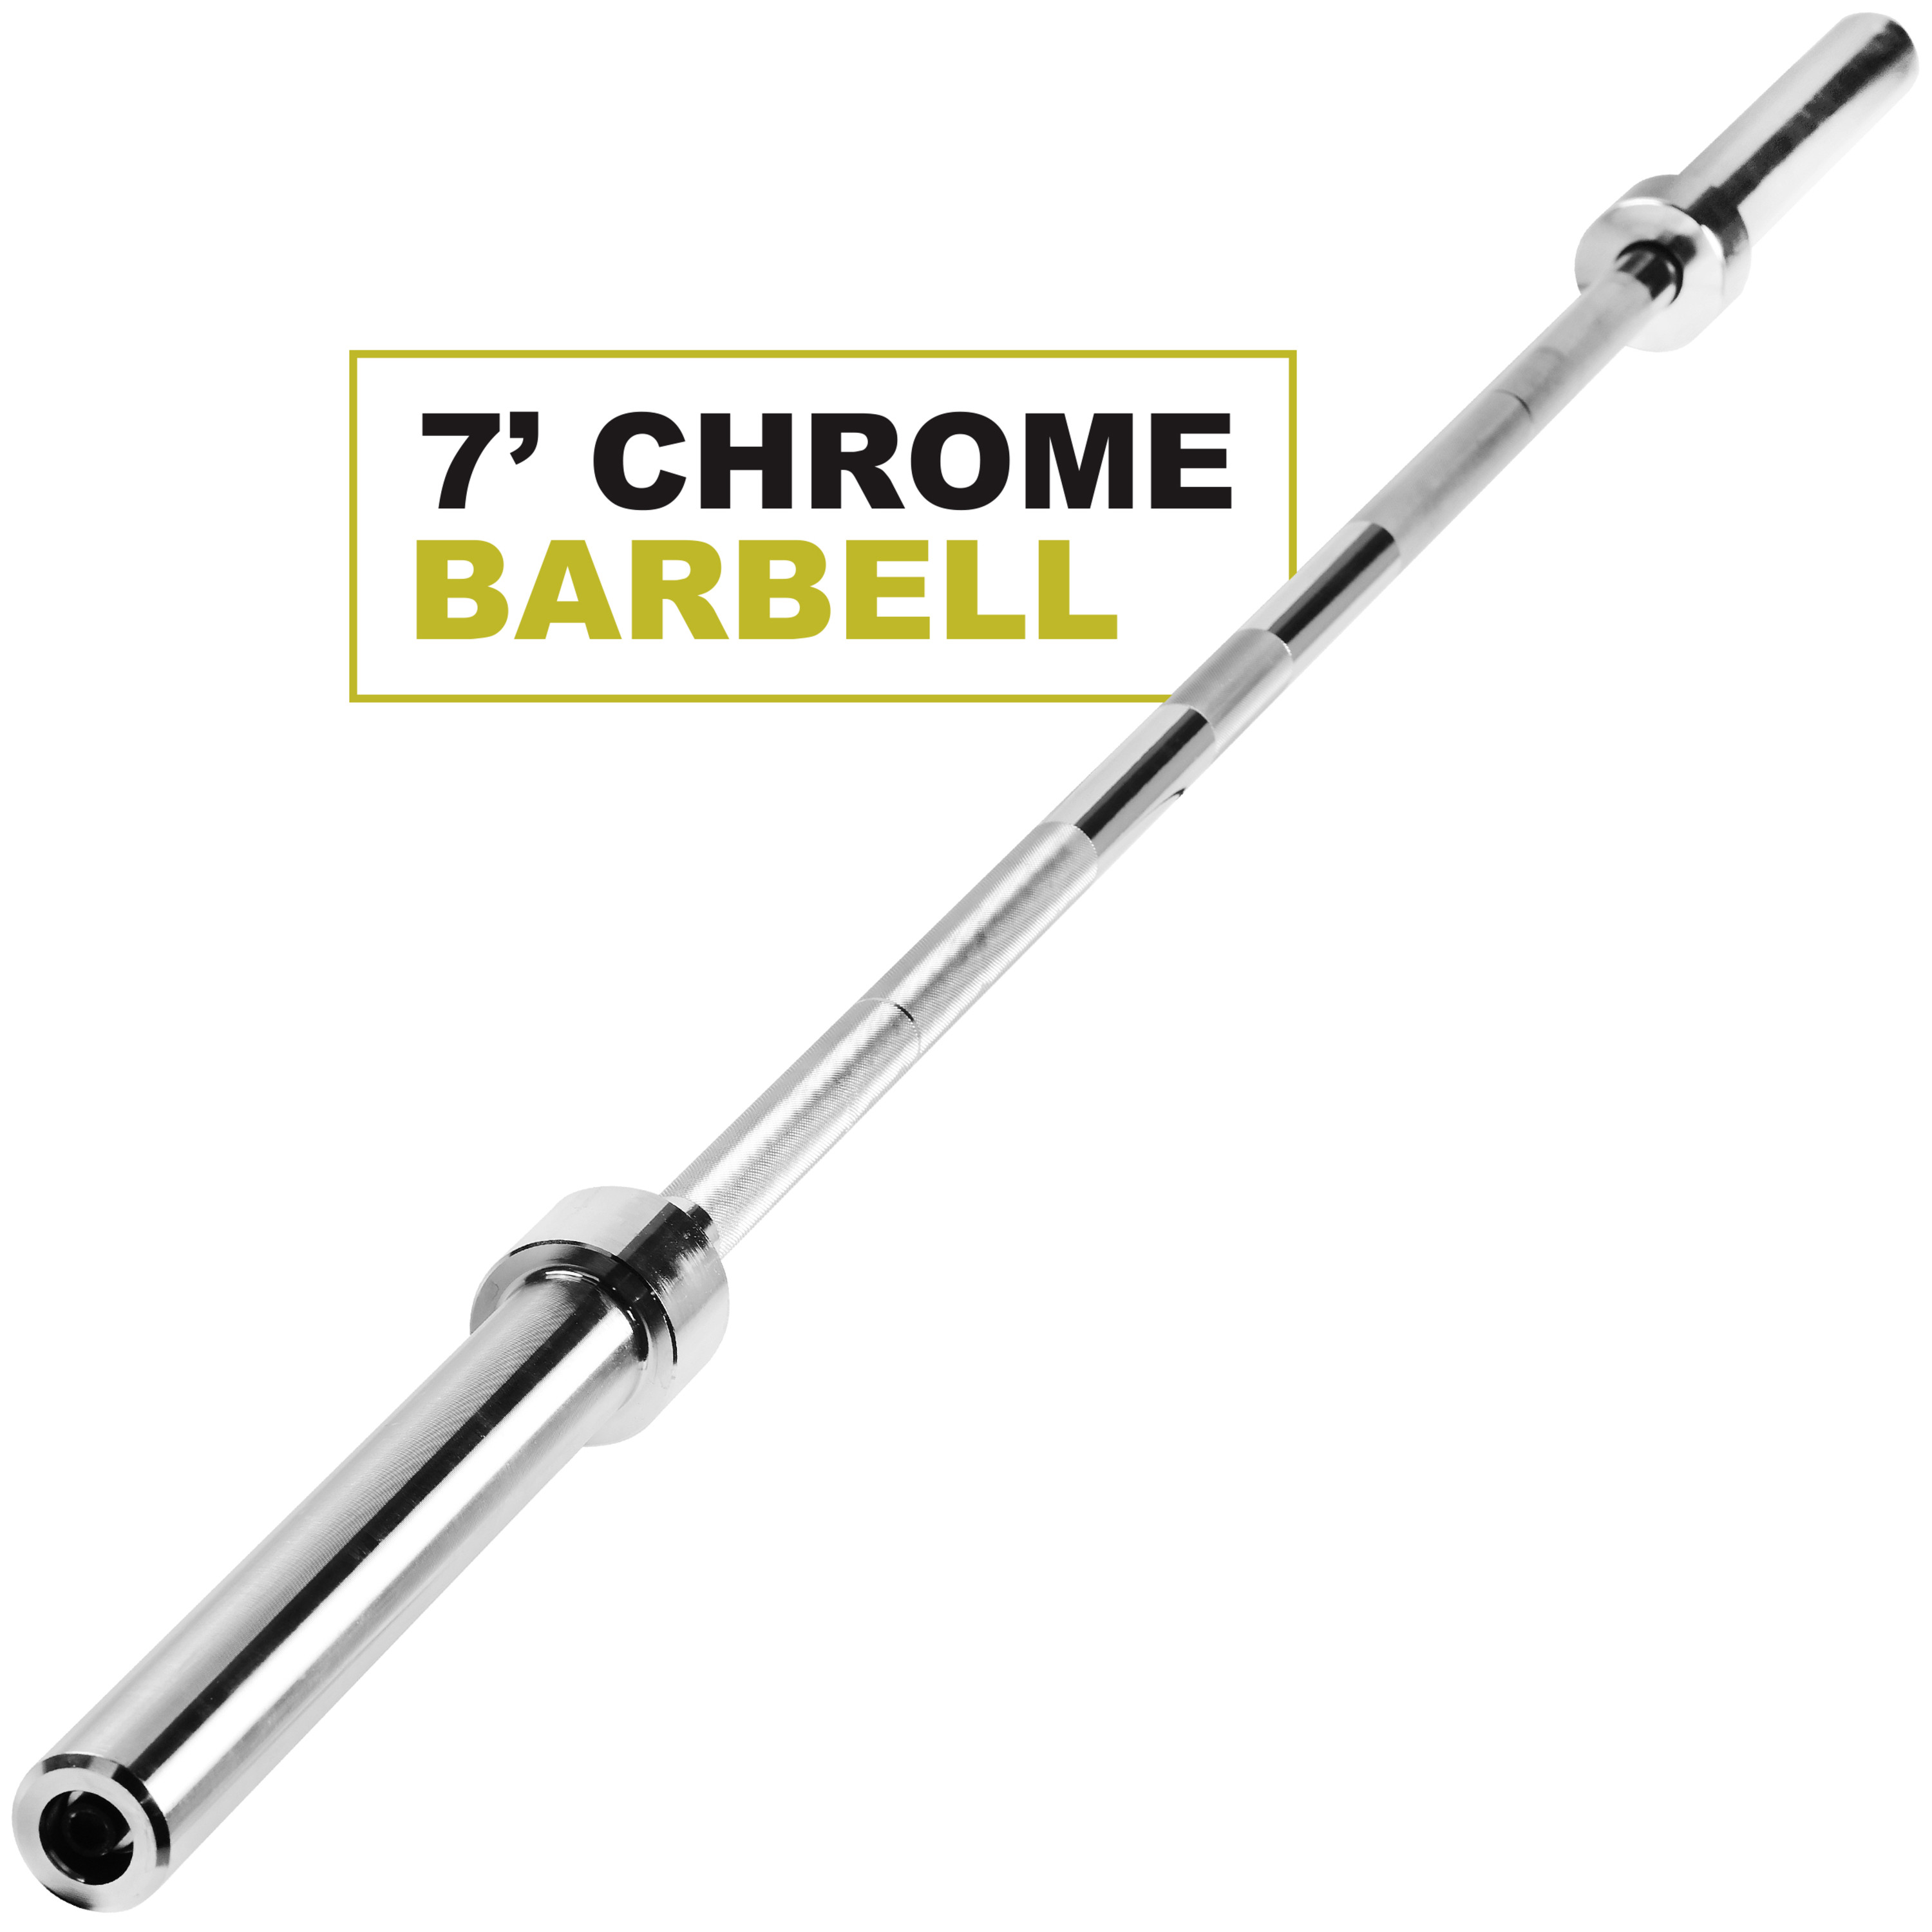 PRCTZ 7 ft Olympic Barbell with 2 In. Sleeve Diameter, 45 Pound Weighted Barbell with 800-Pound Capacity, Available in Black and Chrome - image 2 of 10